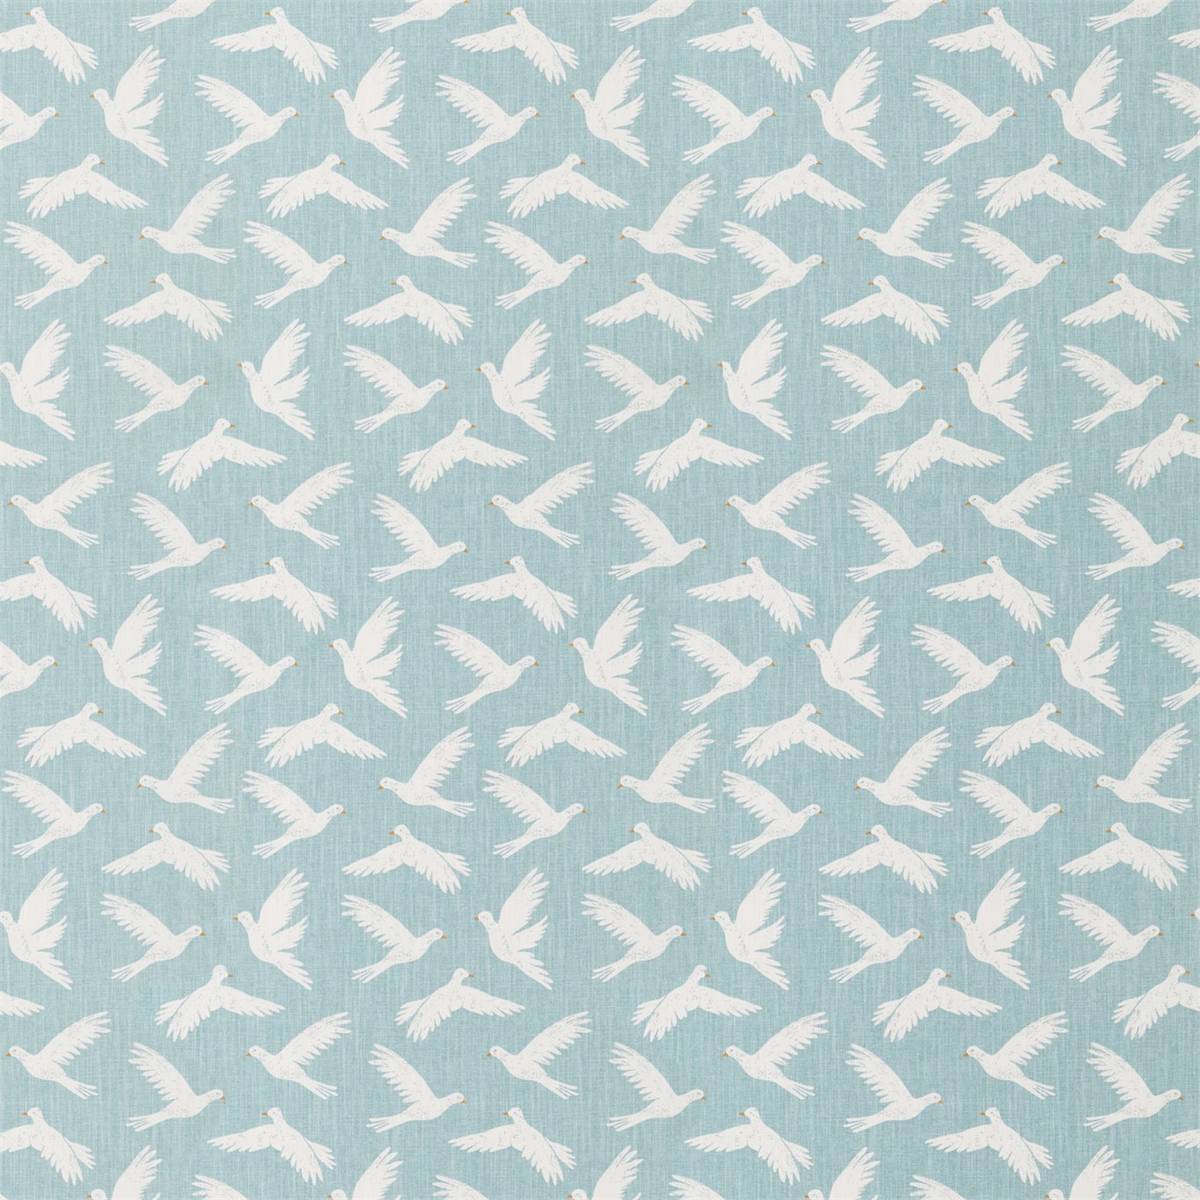 Paper Doves Duck Egg Fabric by Sanderson